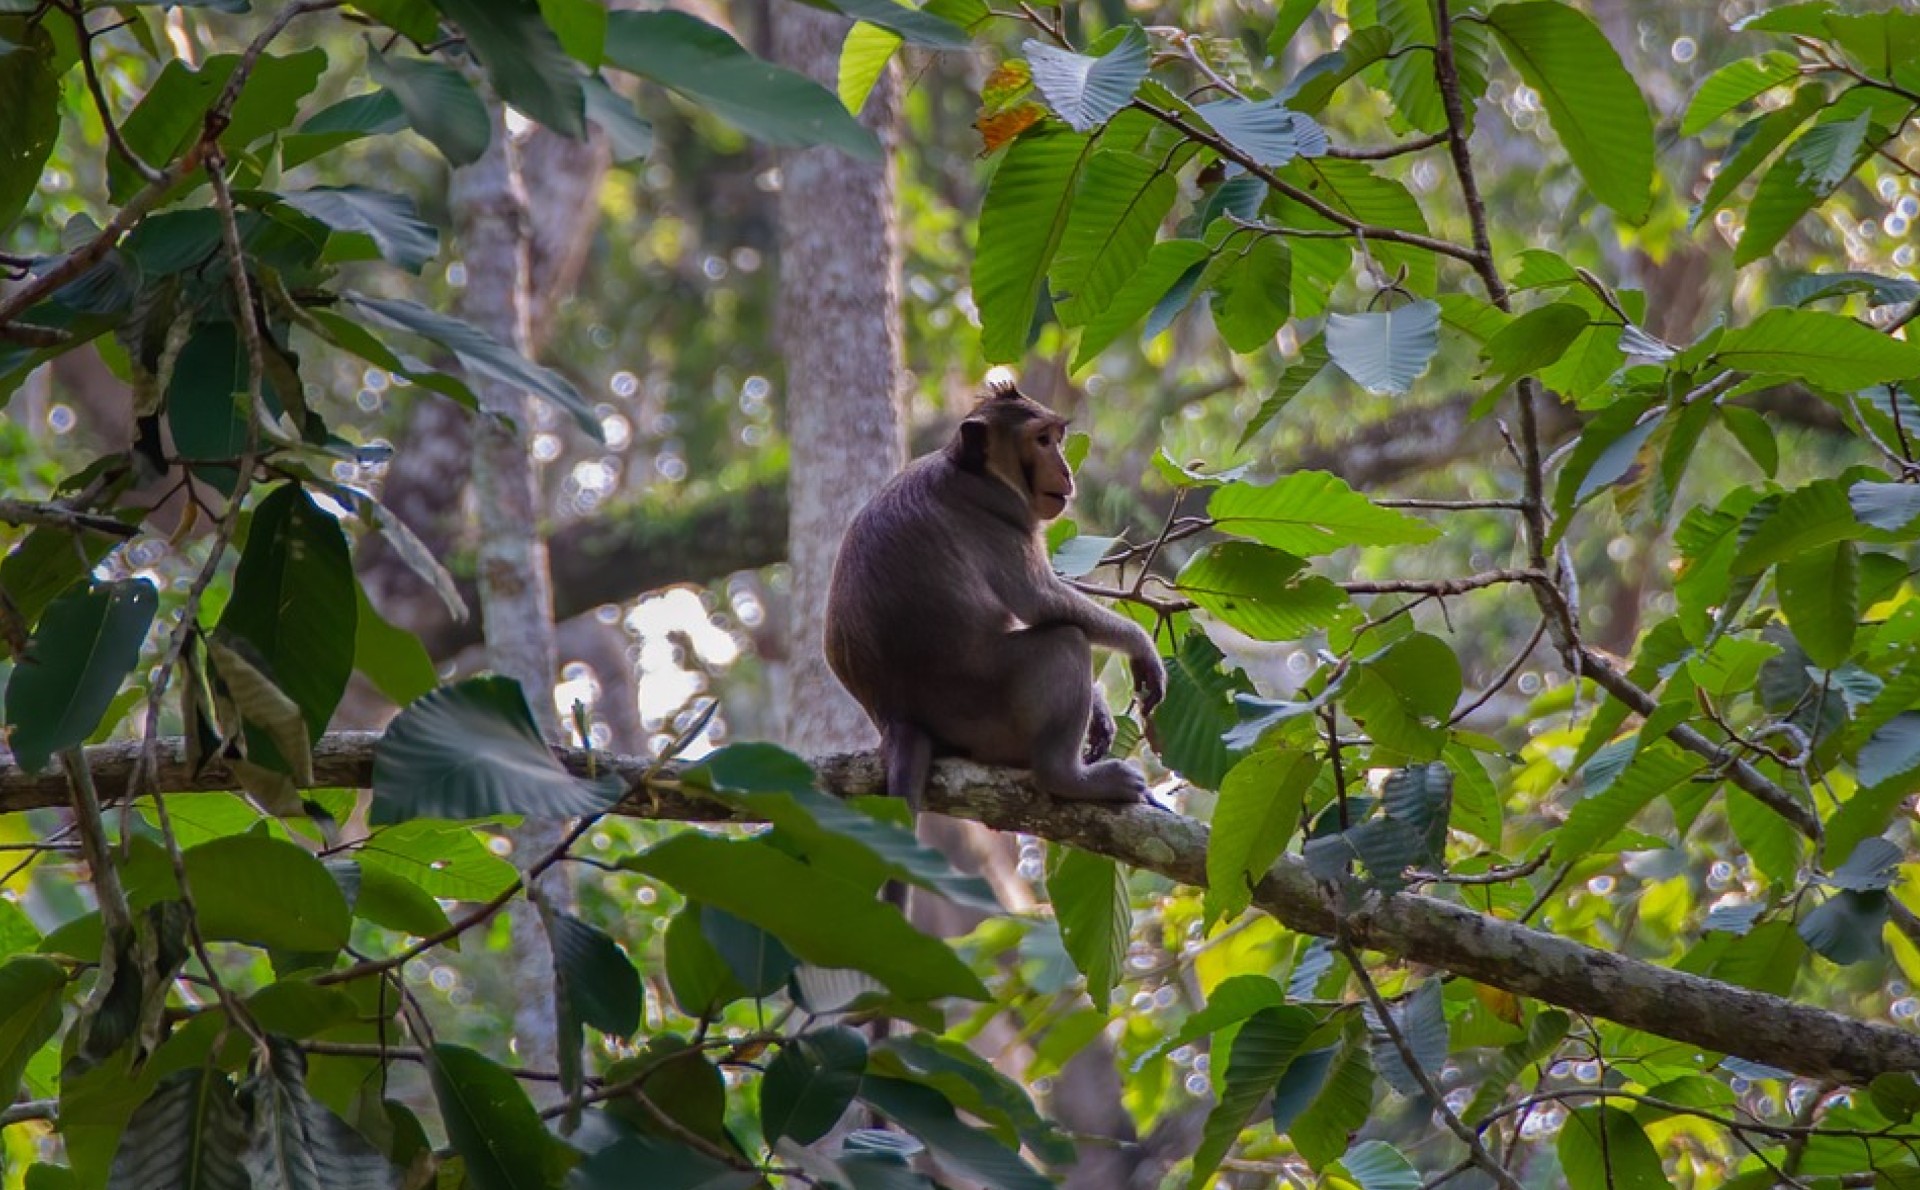 A wild long-tailed macaque sitting high up in the treetops